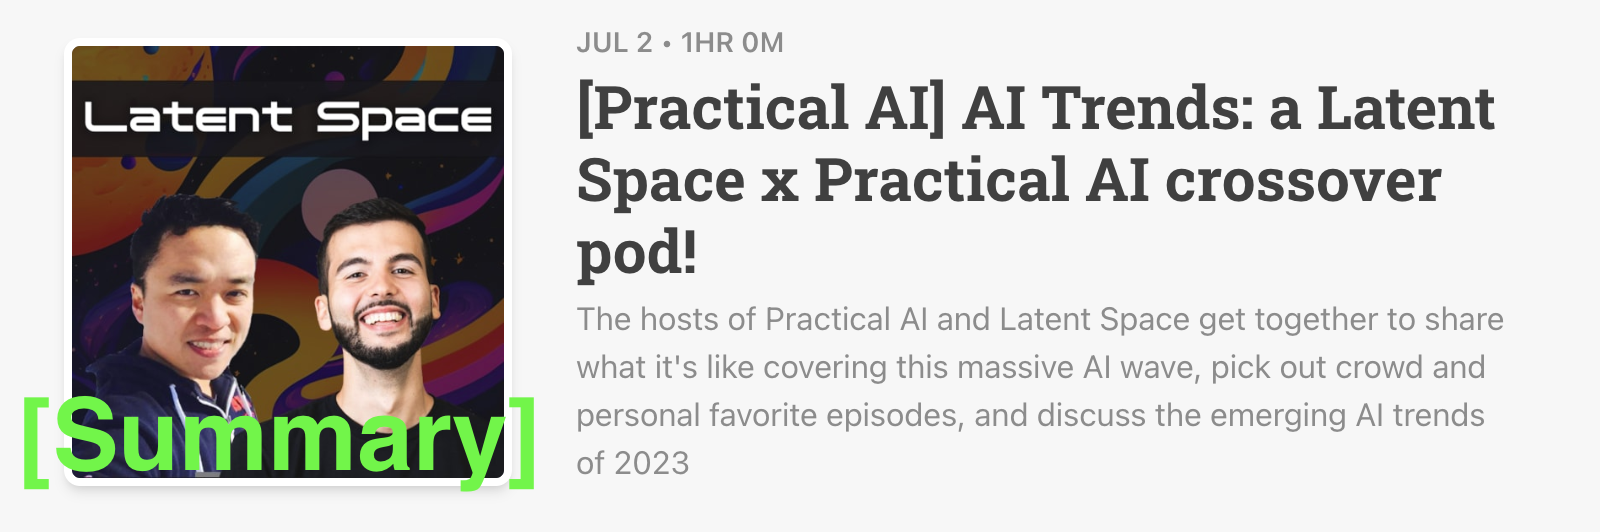 Latent Space Podcast 7/2/23 [Summary] AI Trends: a Latent Space x Practical AI crossover pod!